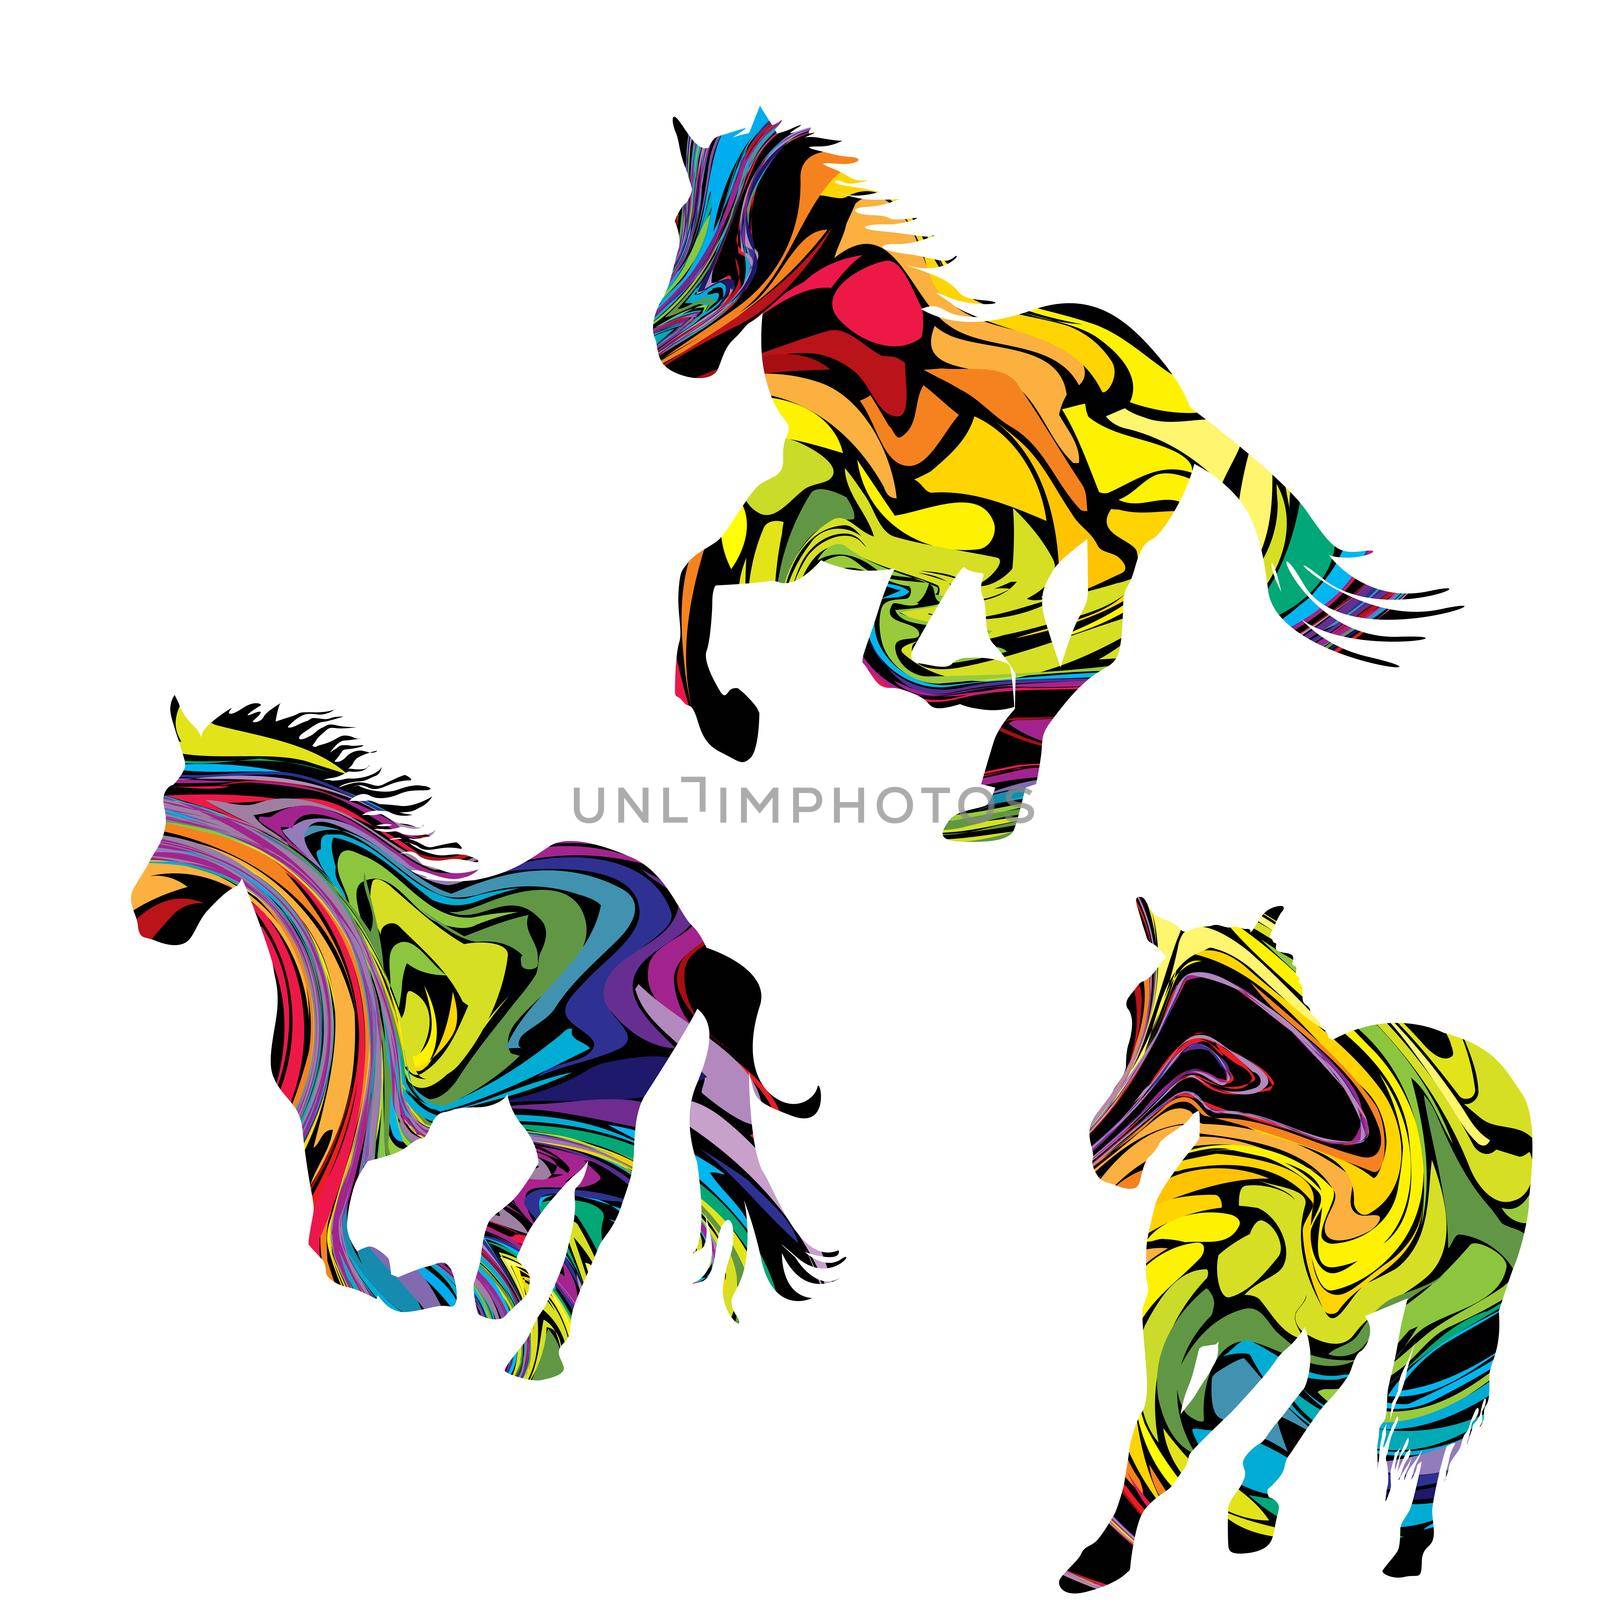 Colorful abstract silhouettes of three galloping horses by hibrida13